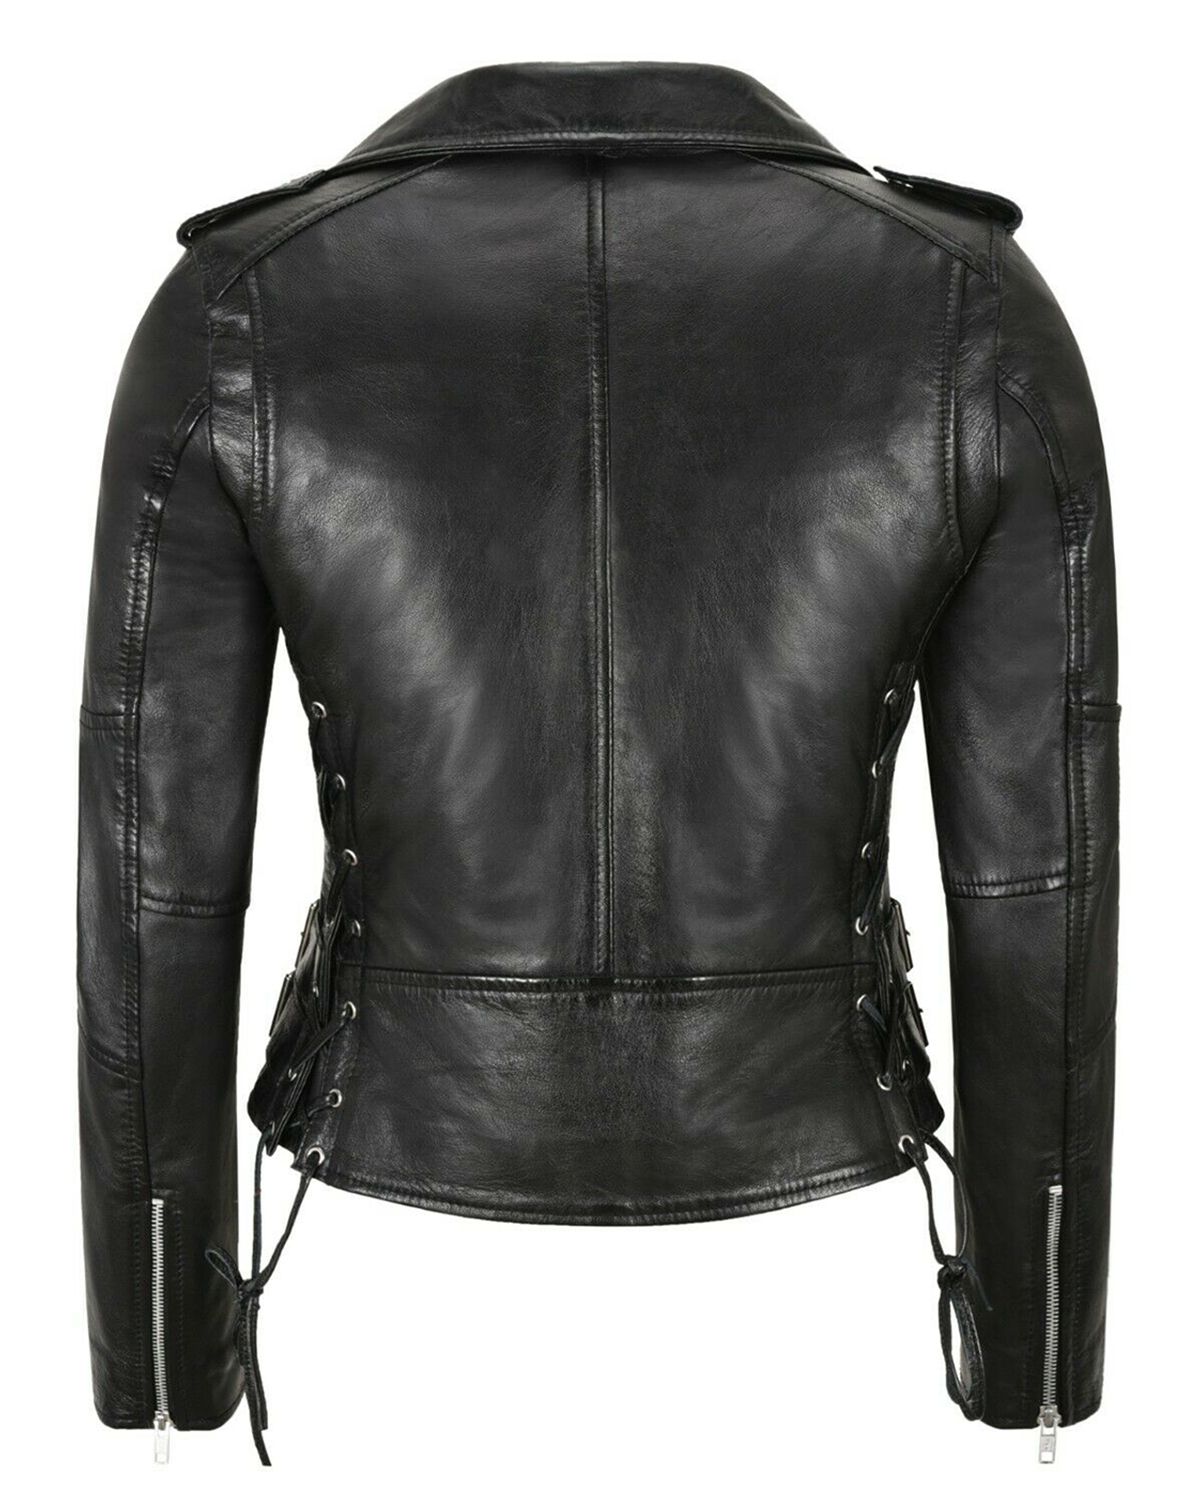 women's coats Women's jacket with lace fitted leather jacket women slim fit jacket women new fashion jacket women black biker jacket women motorcycle jacket women black lace jacket fitted jacket women gift for her ladies jackets and coats